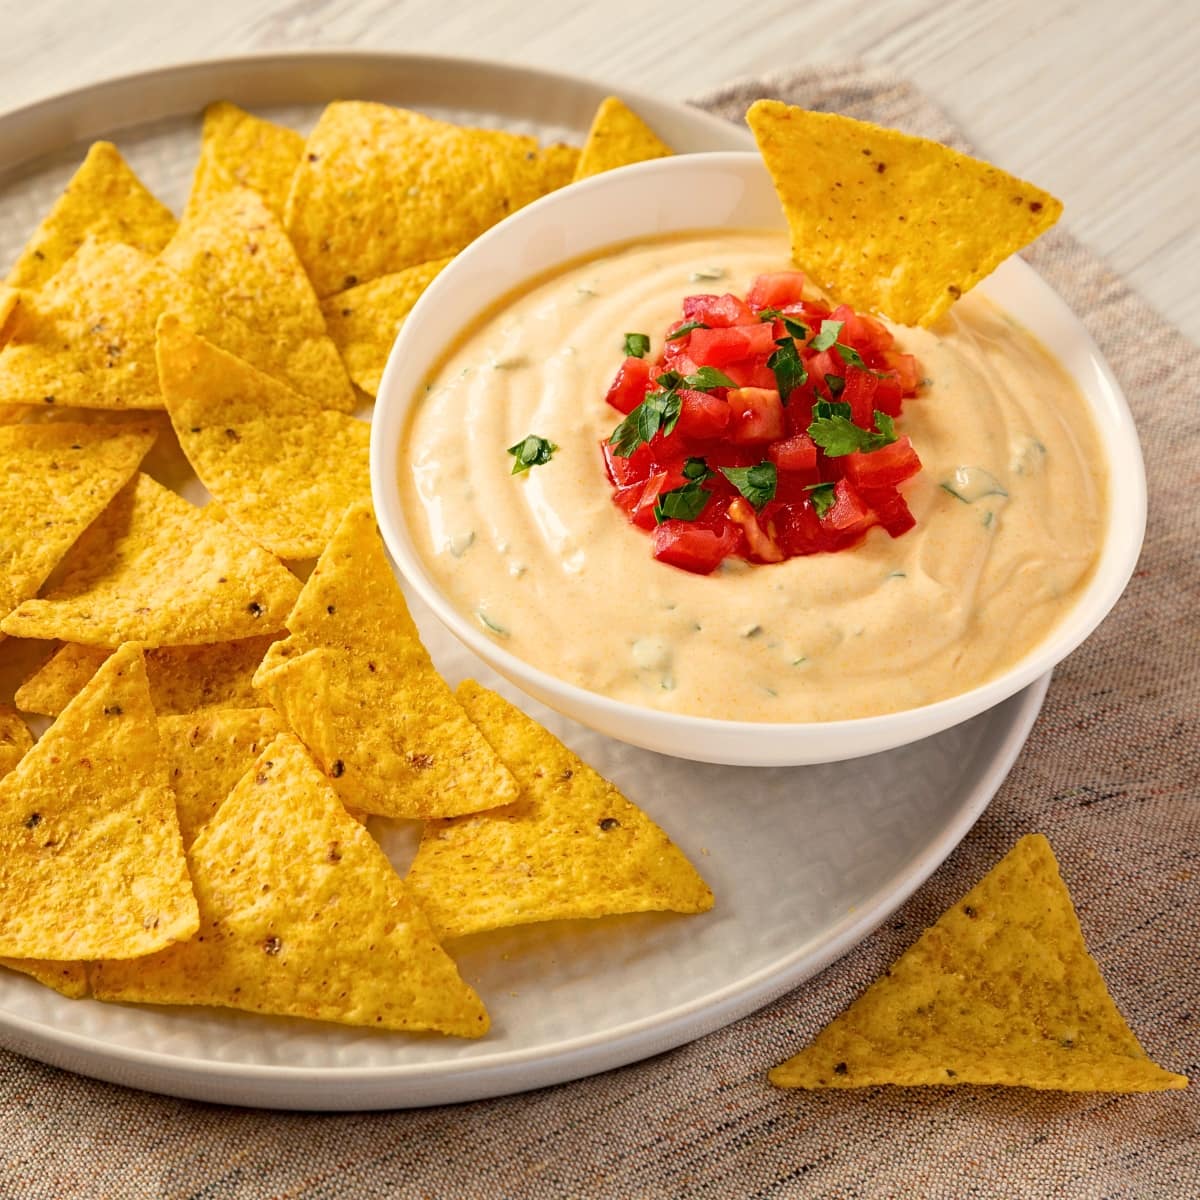 White queso dip in a bowl garnished with salsa served with tortilla chips.